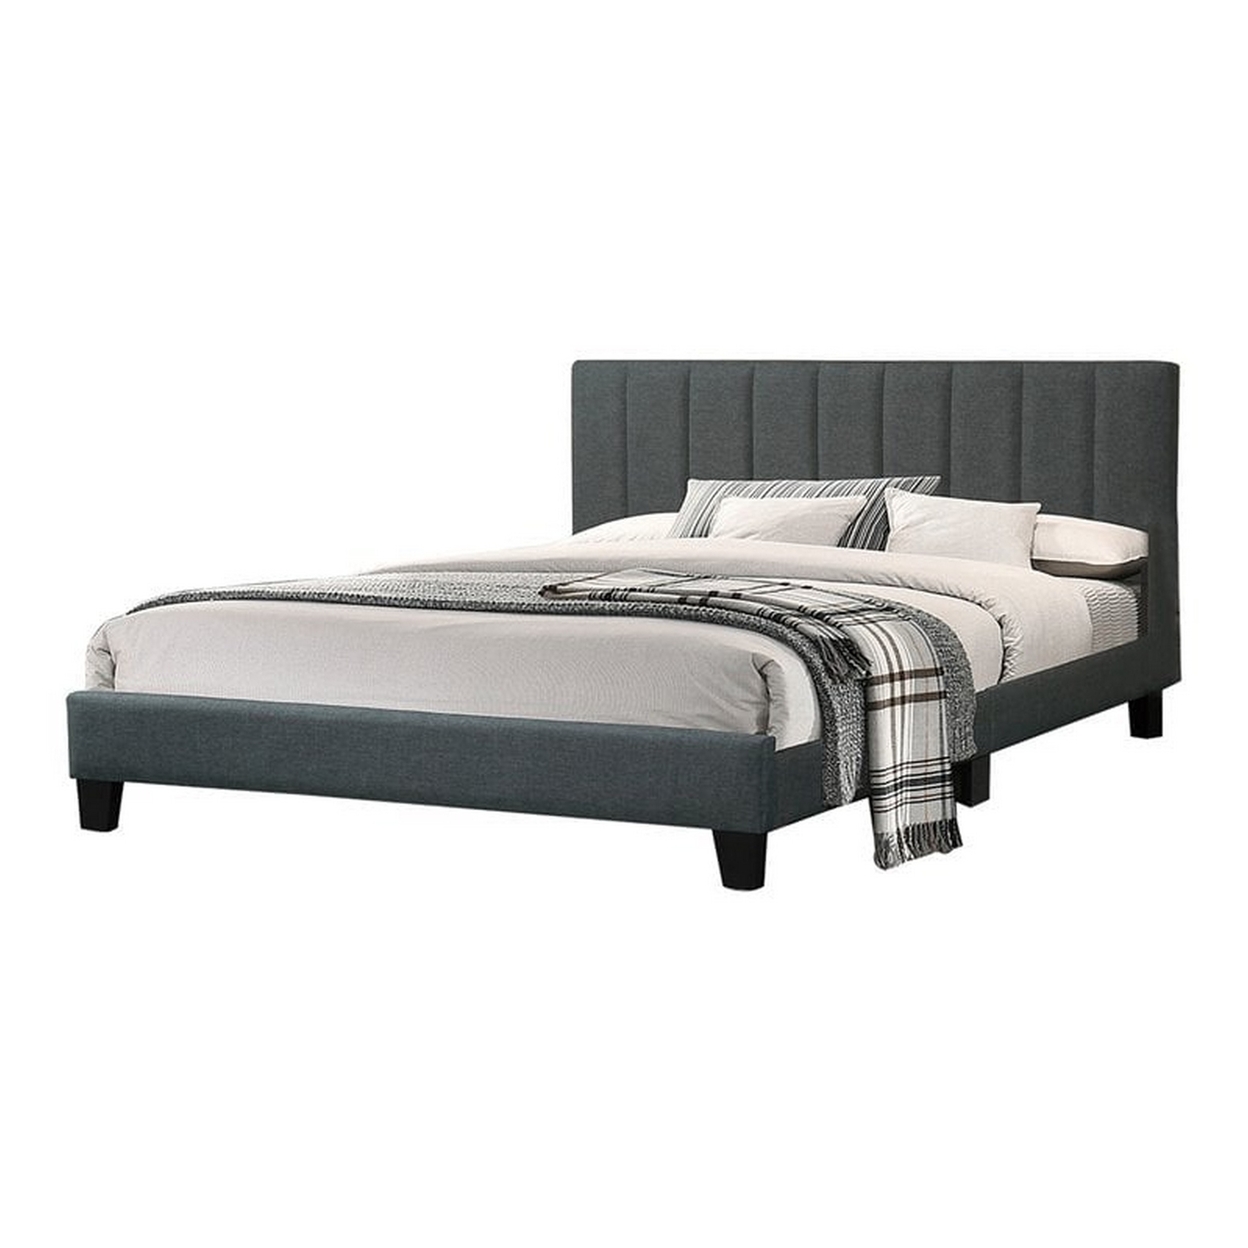 Eve Platform Queen Size Bed, Vertical Channel Tufting, Charcoal Upholstery- Saltoro Sherpi